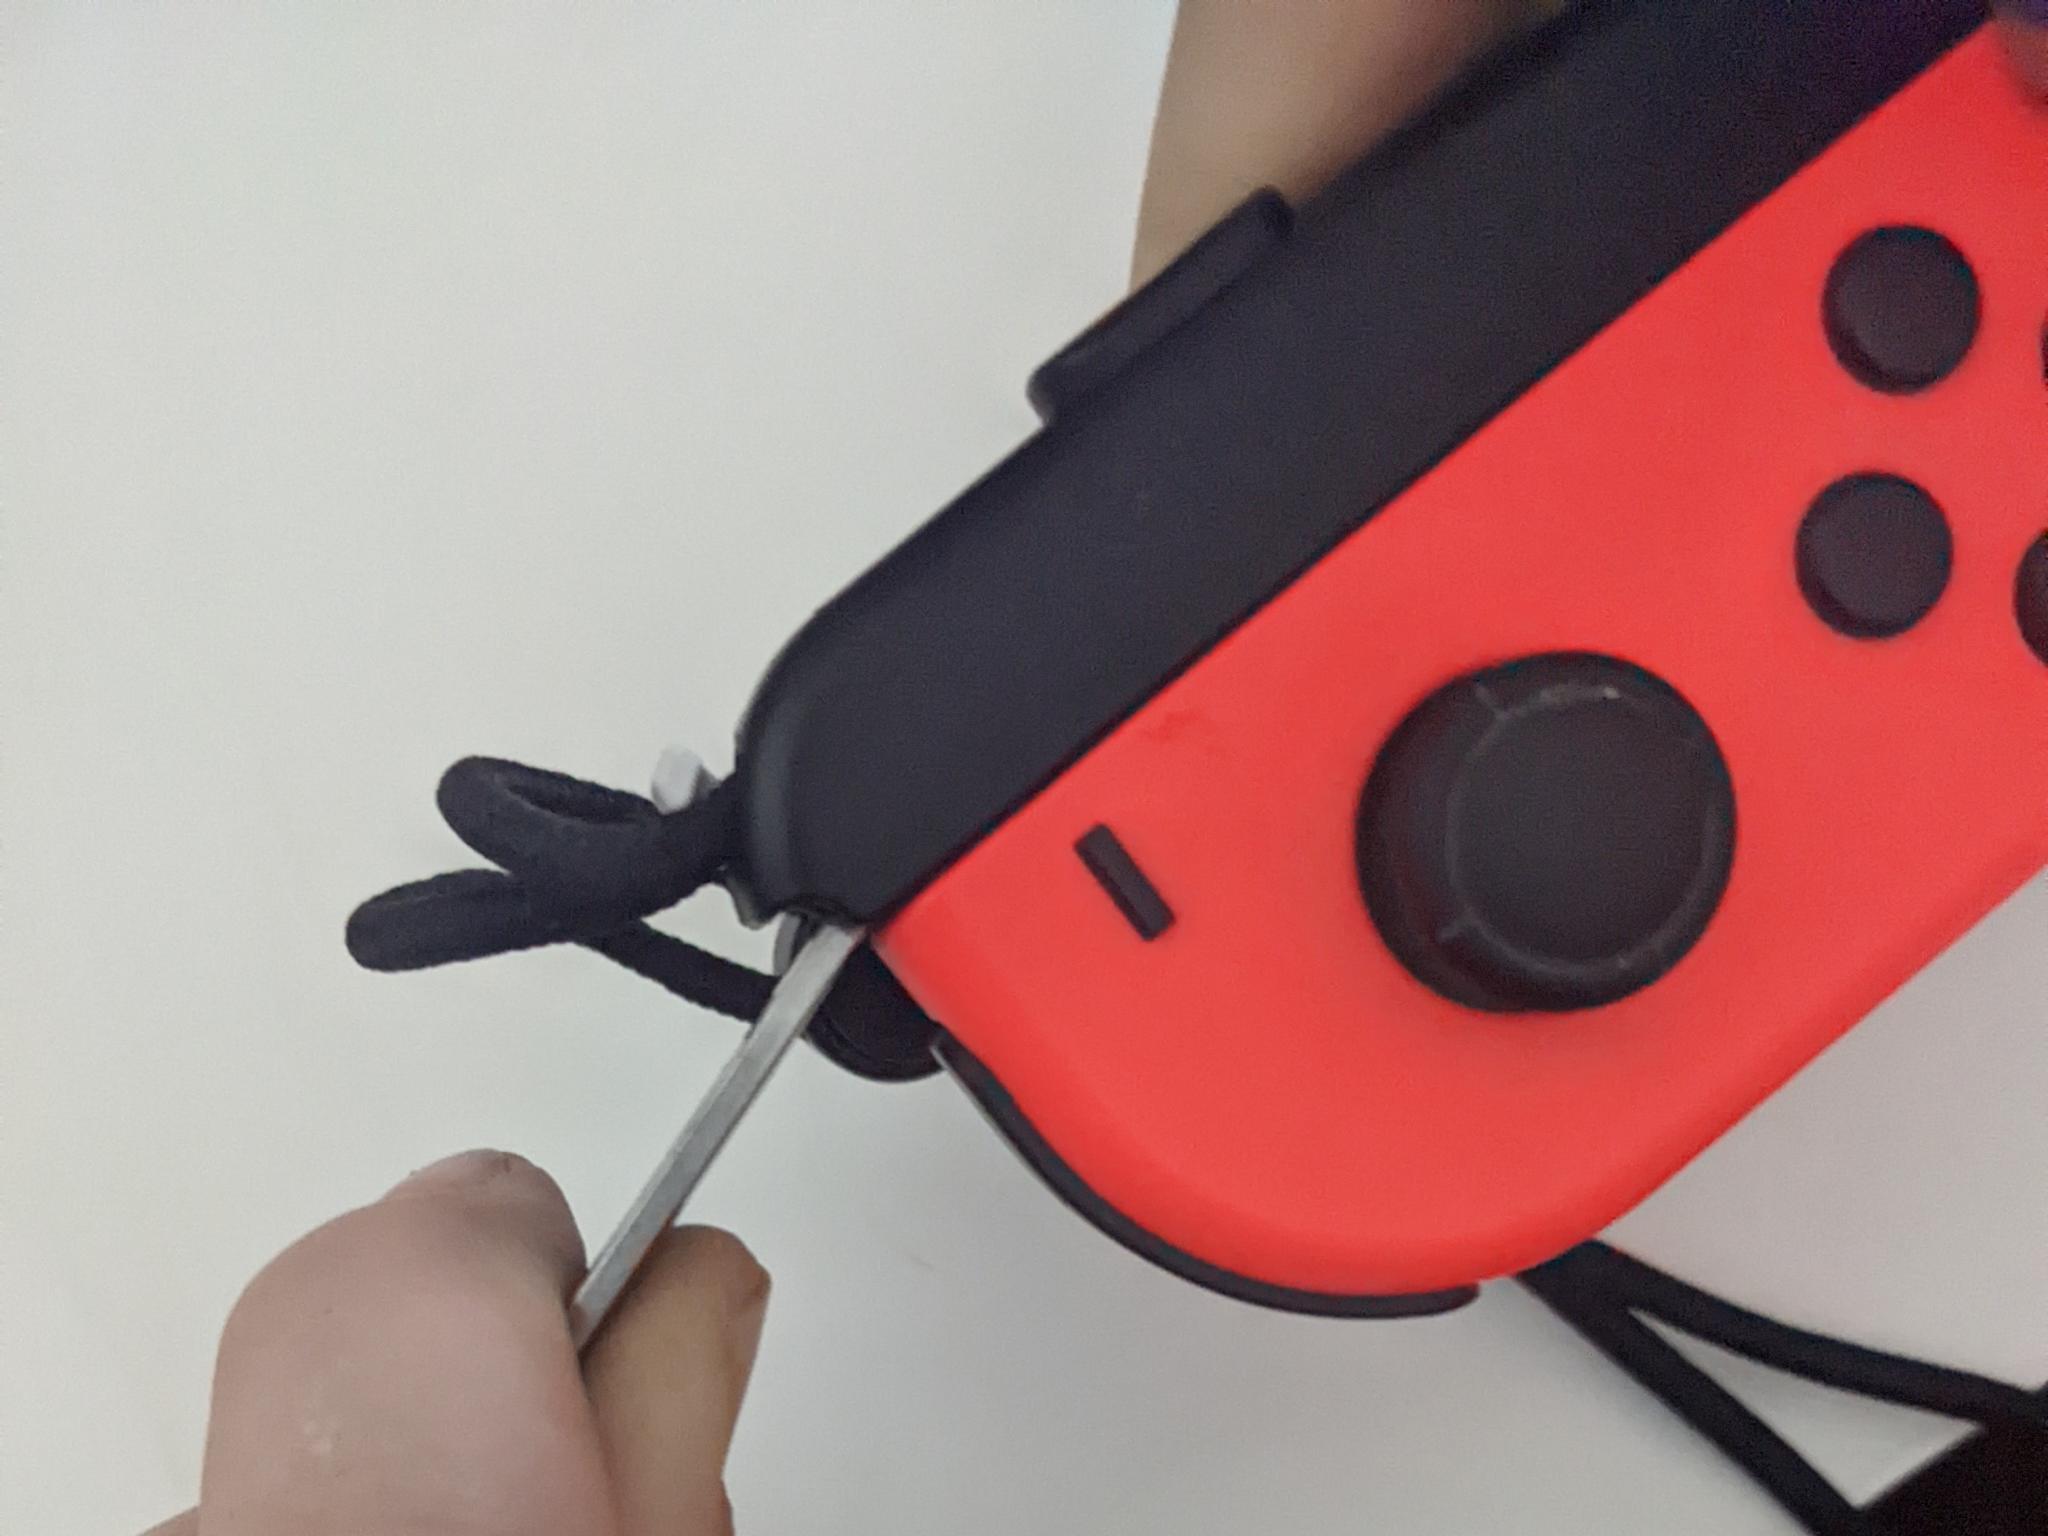 How to remove a stuck Joy-Con strap: push object toward prongs and away from the Joy-Con body with one hand